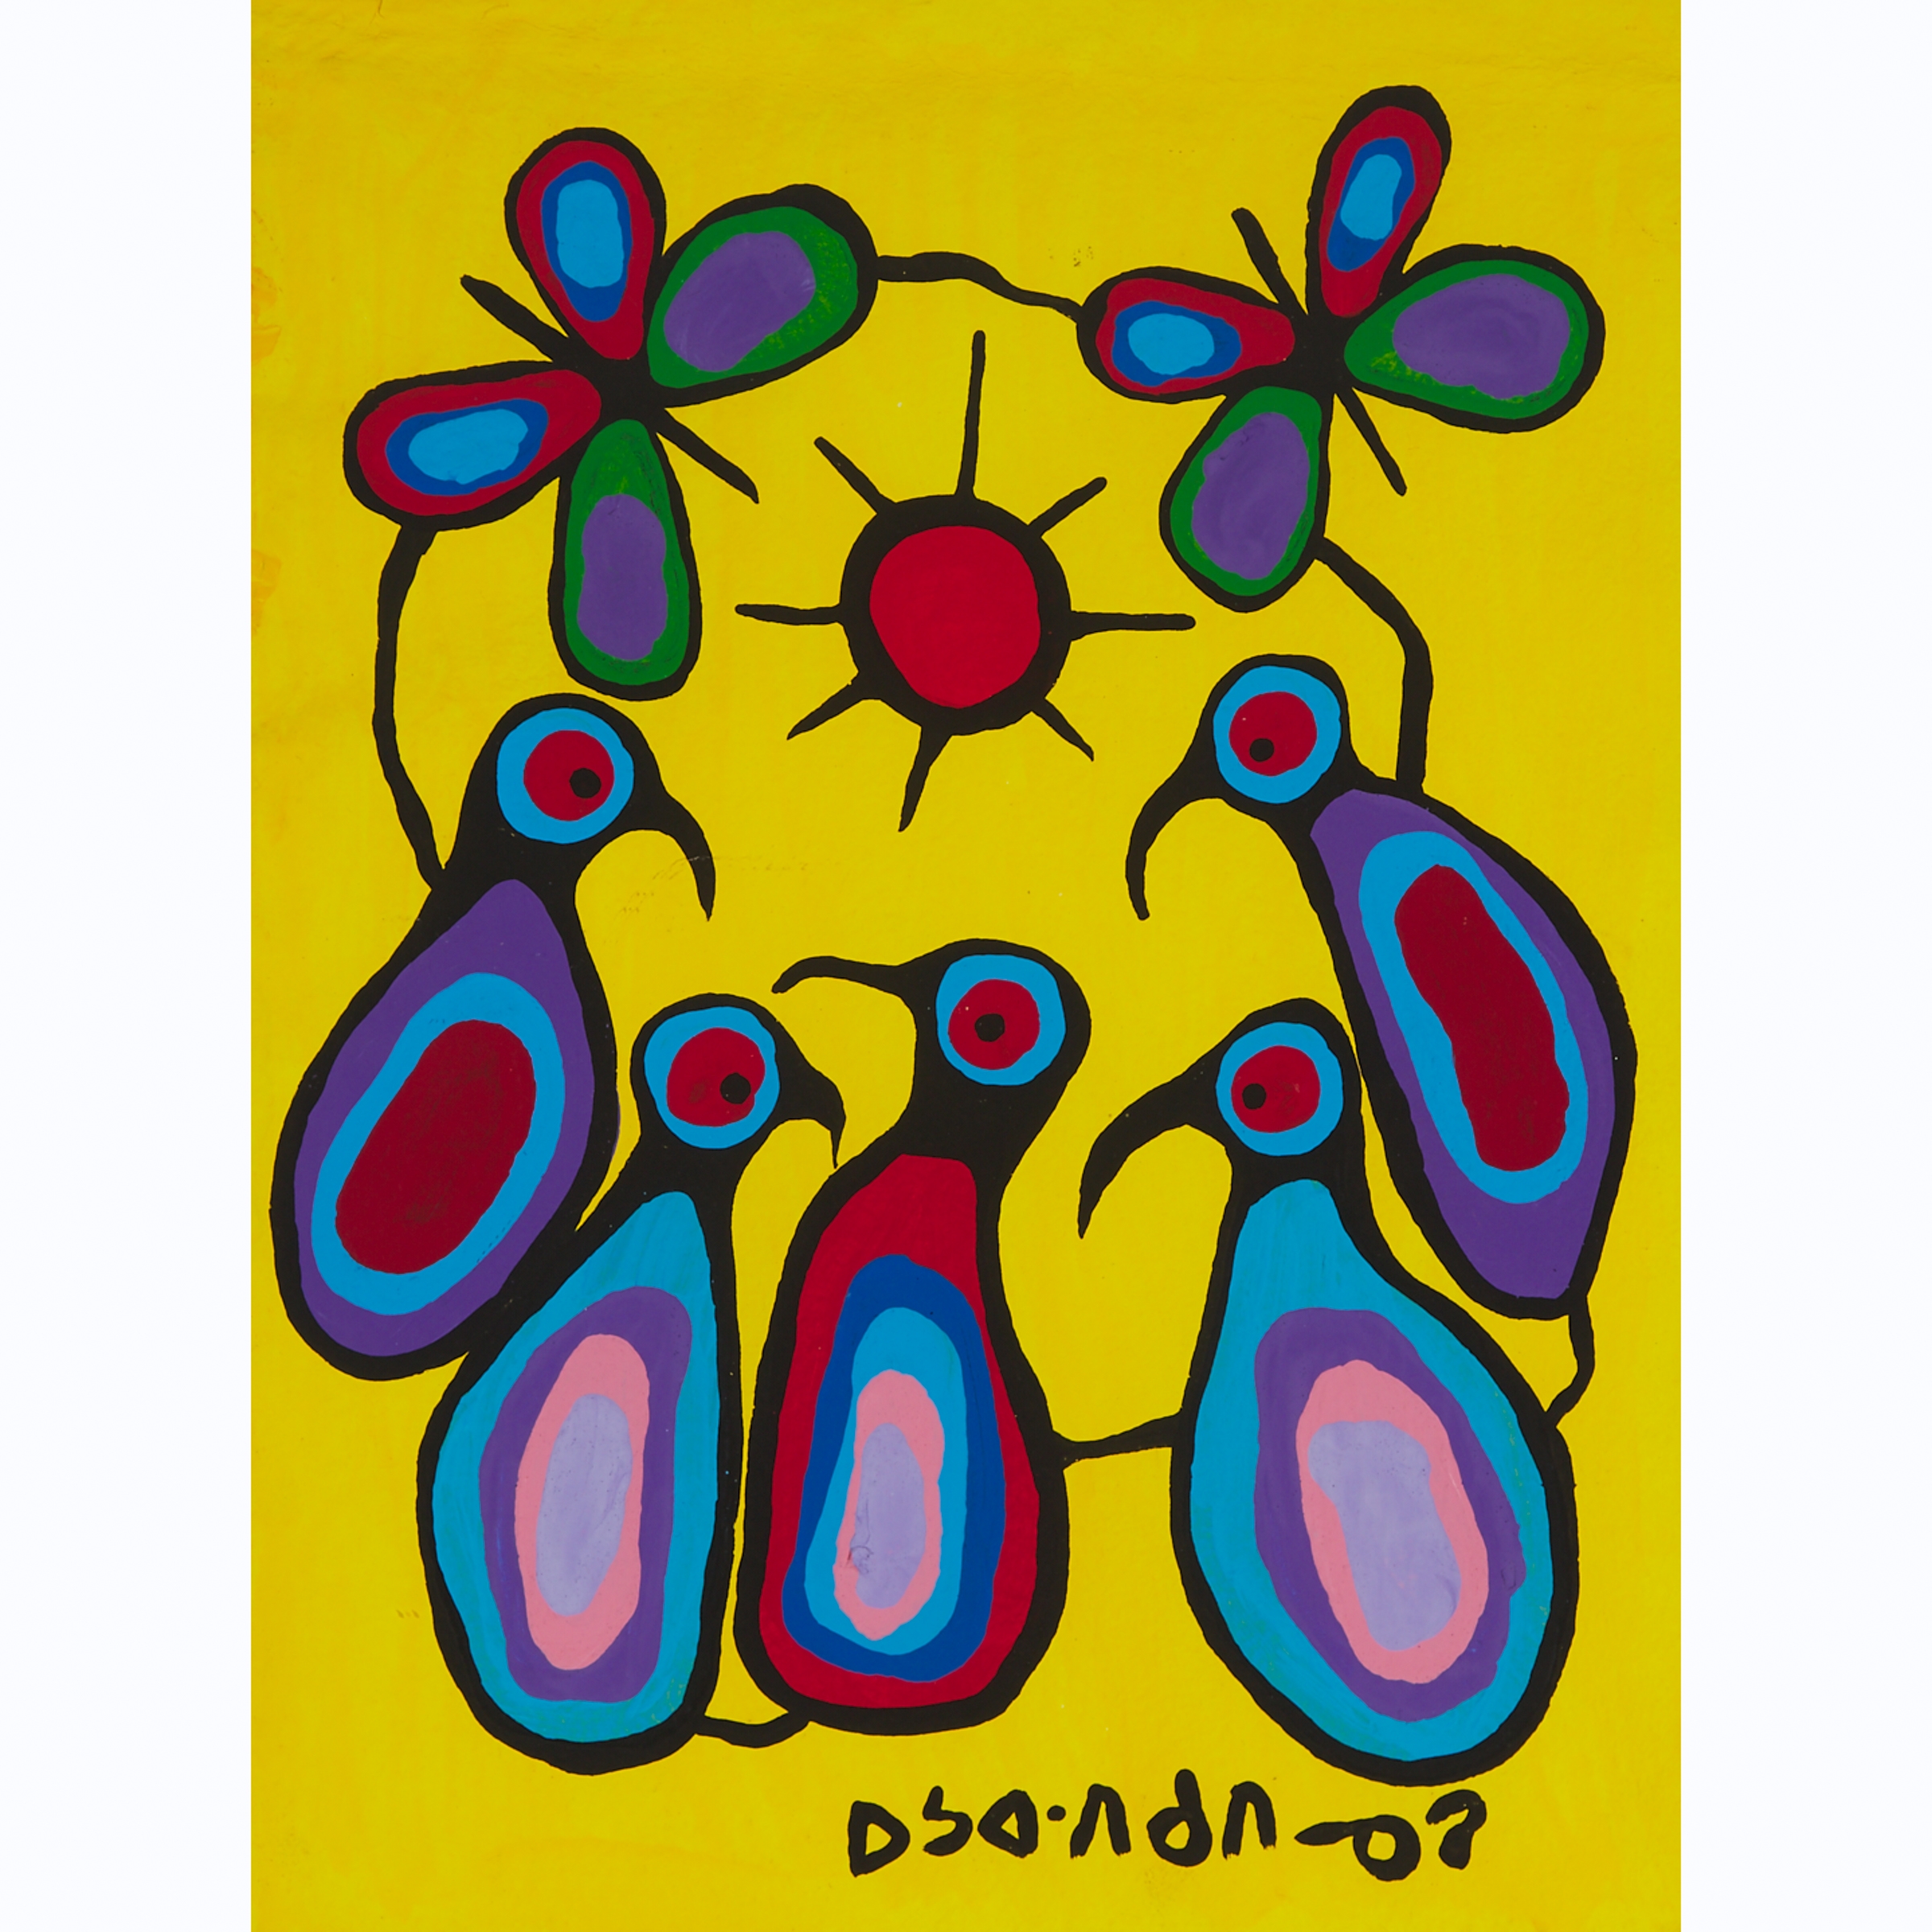 PRELUDE TO SPRING by Norval Morrisseau